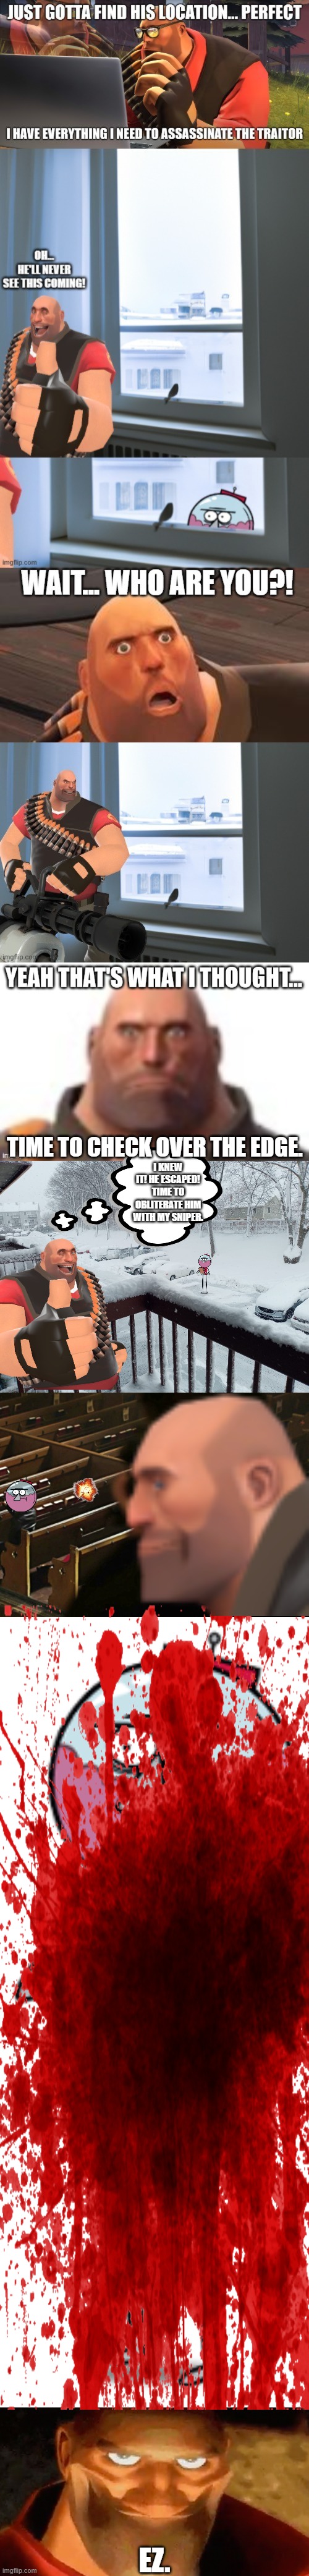 Benson Dumbwoody is no match for Heavy. He cannot escape. | TIME TO CHECK OVER THE EDGE. I KNEW IT! HE ESCAPED! TIME TO OBLITERATE HIM WITH MY SNIPER. EZ. | image tagged in balcony view,assassination chain,benson dumwoody,creepy smile heavy tf2 | made w/ Imgflip meme maker